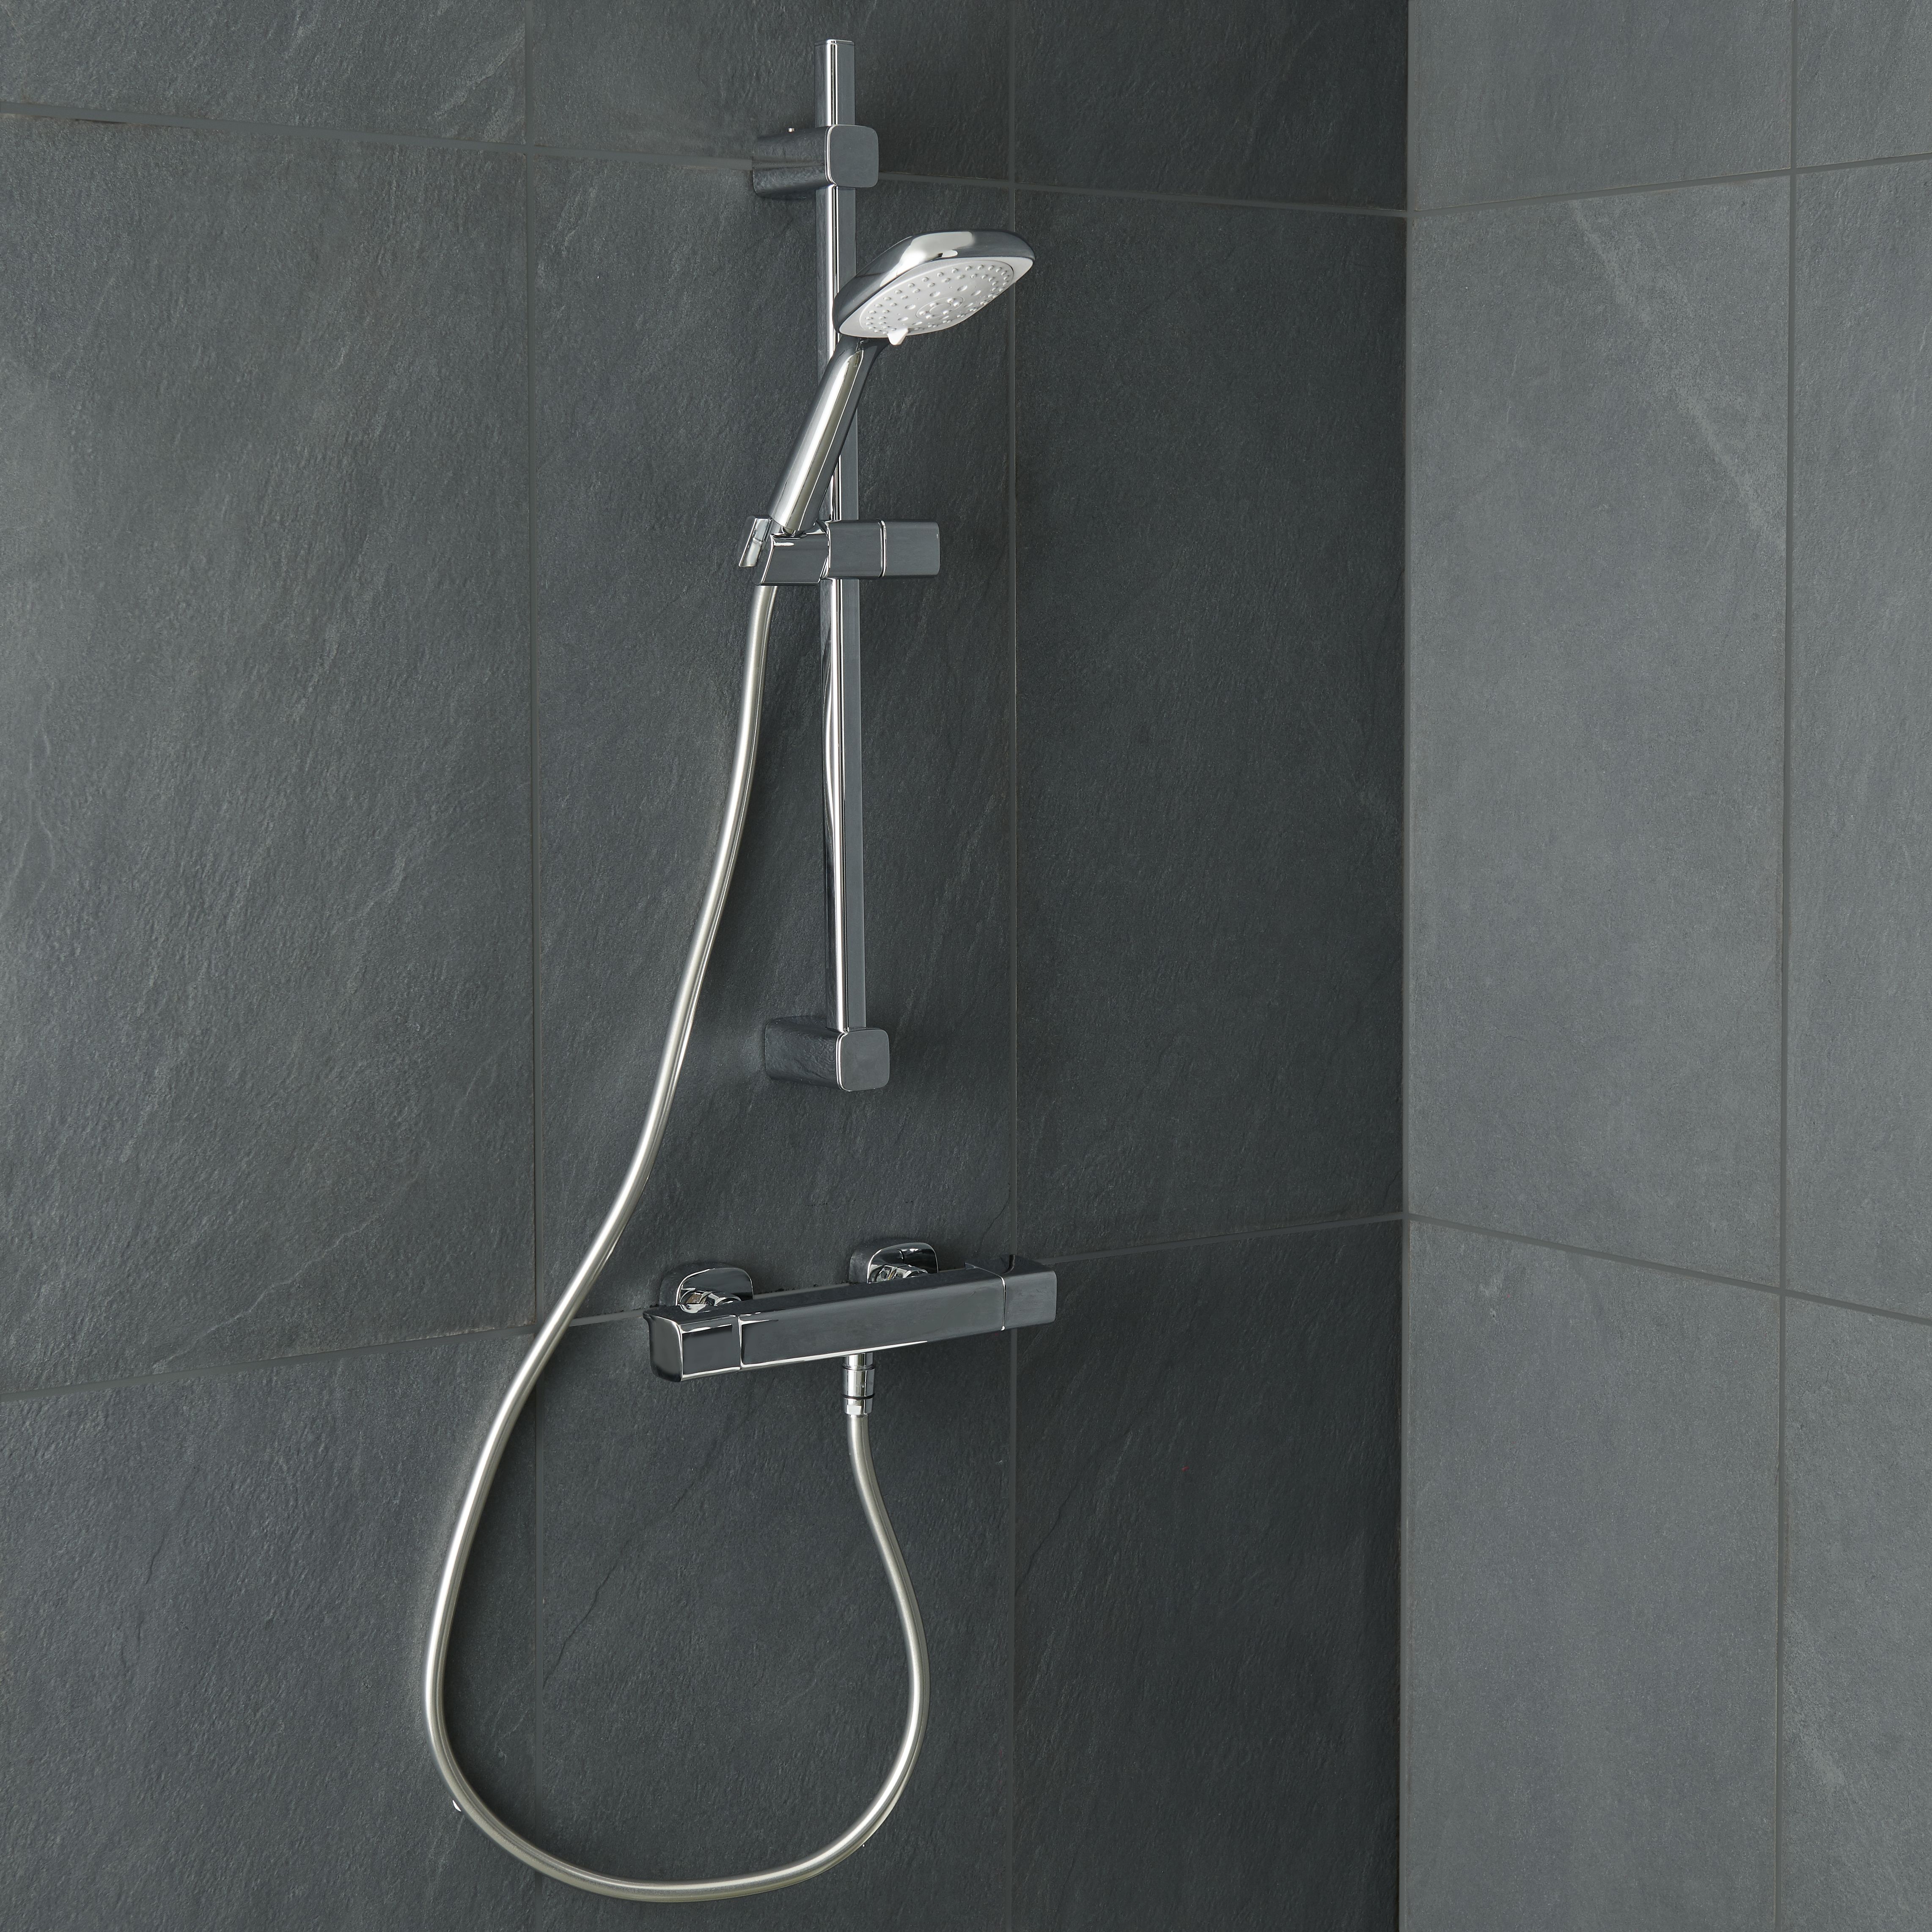 GoodHome Teesta Wall-mounted Thermostatic Mixer Shower